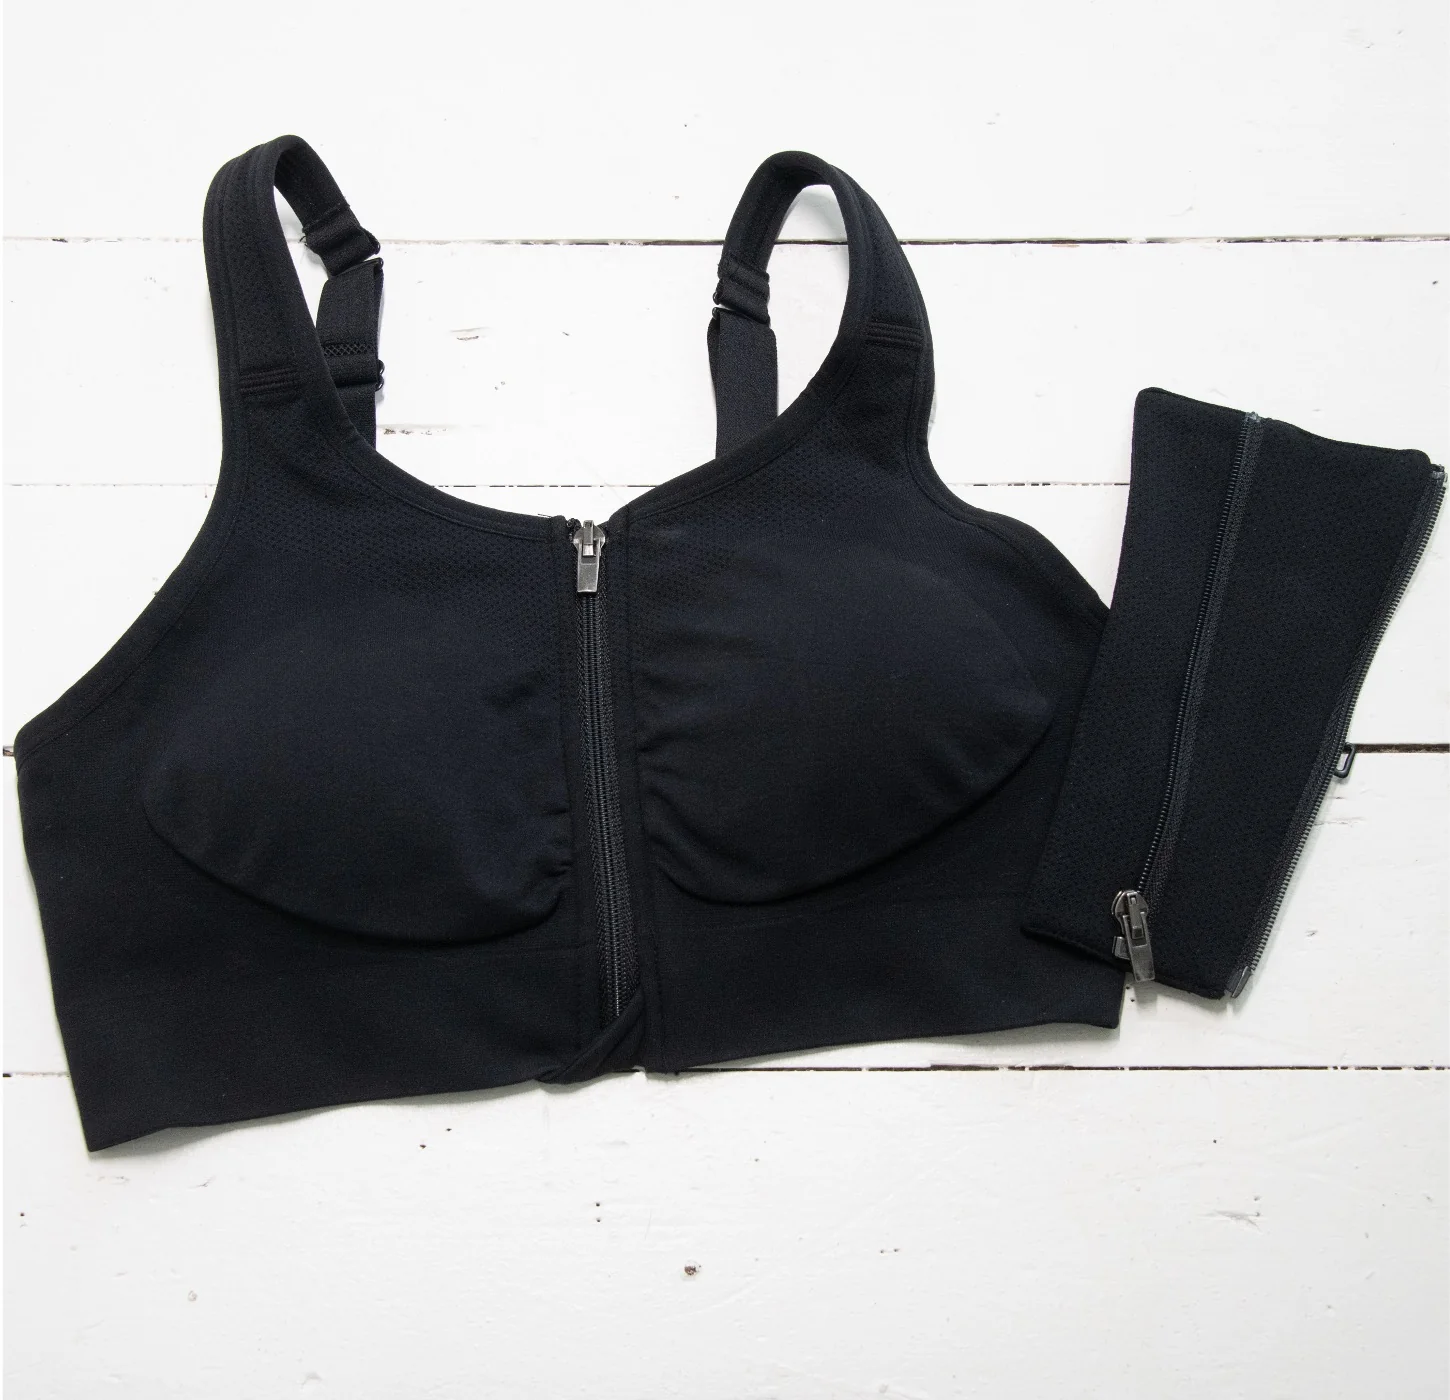 Wear Ease Compression Bra - SunMED Choice